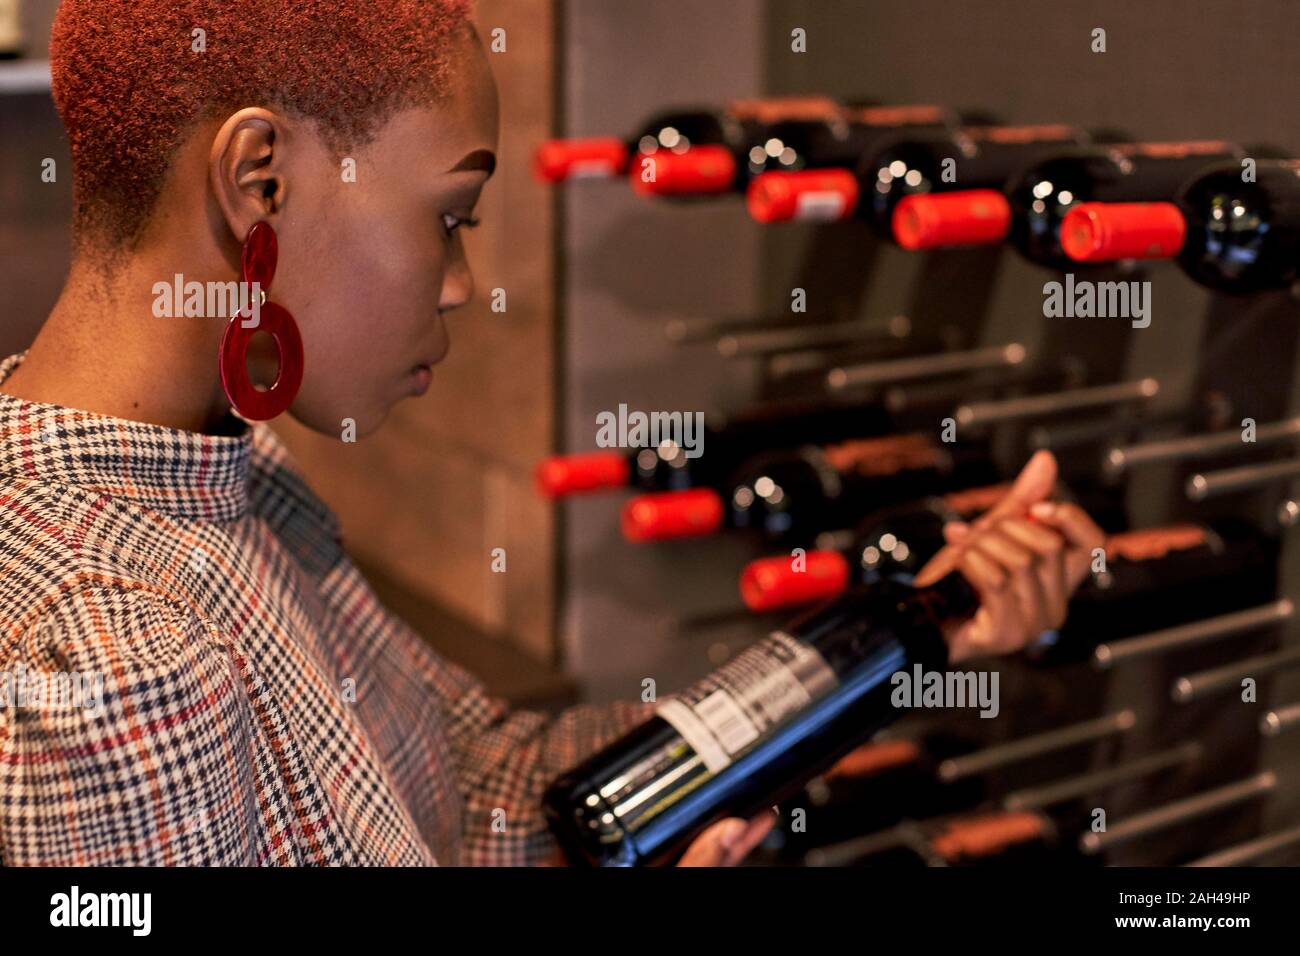 Young woman with short haircut choosing a wine in her cellar Stock Photo